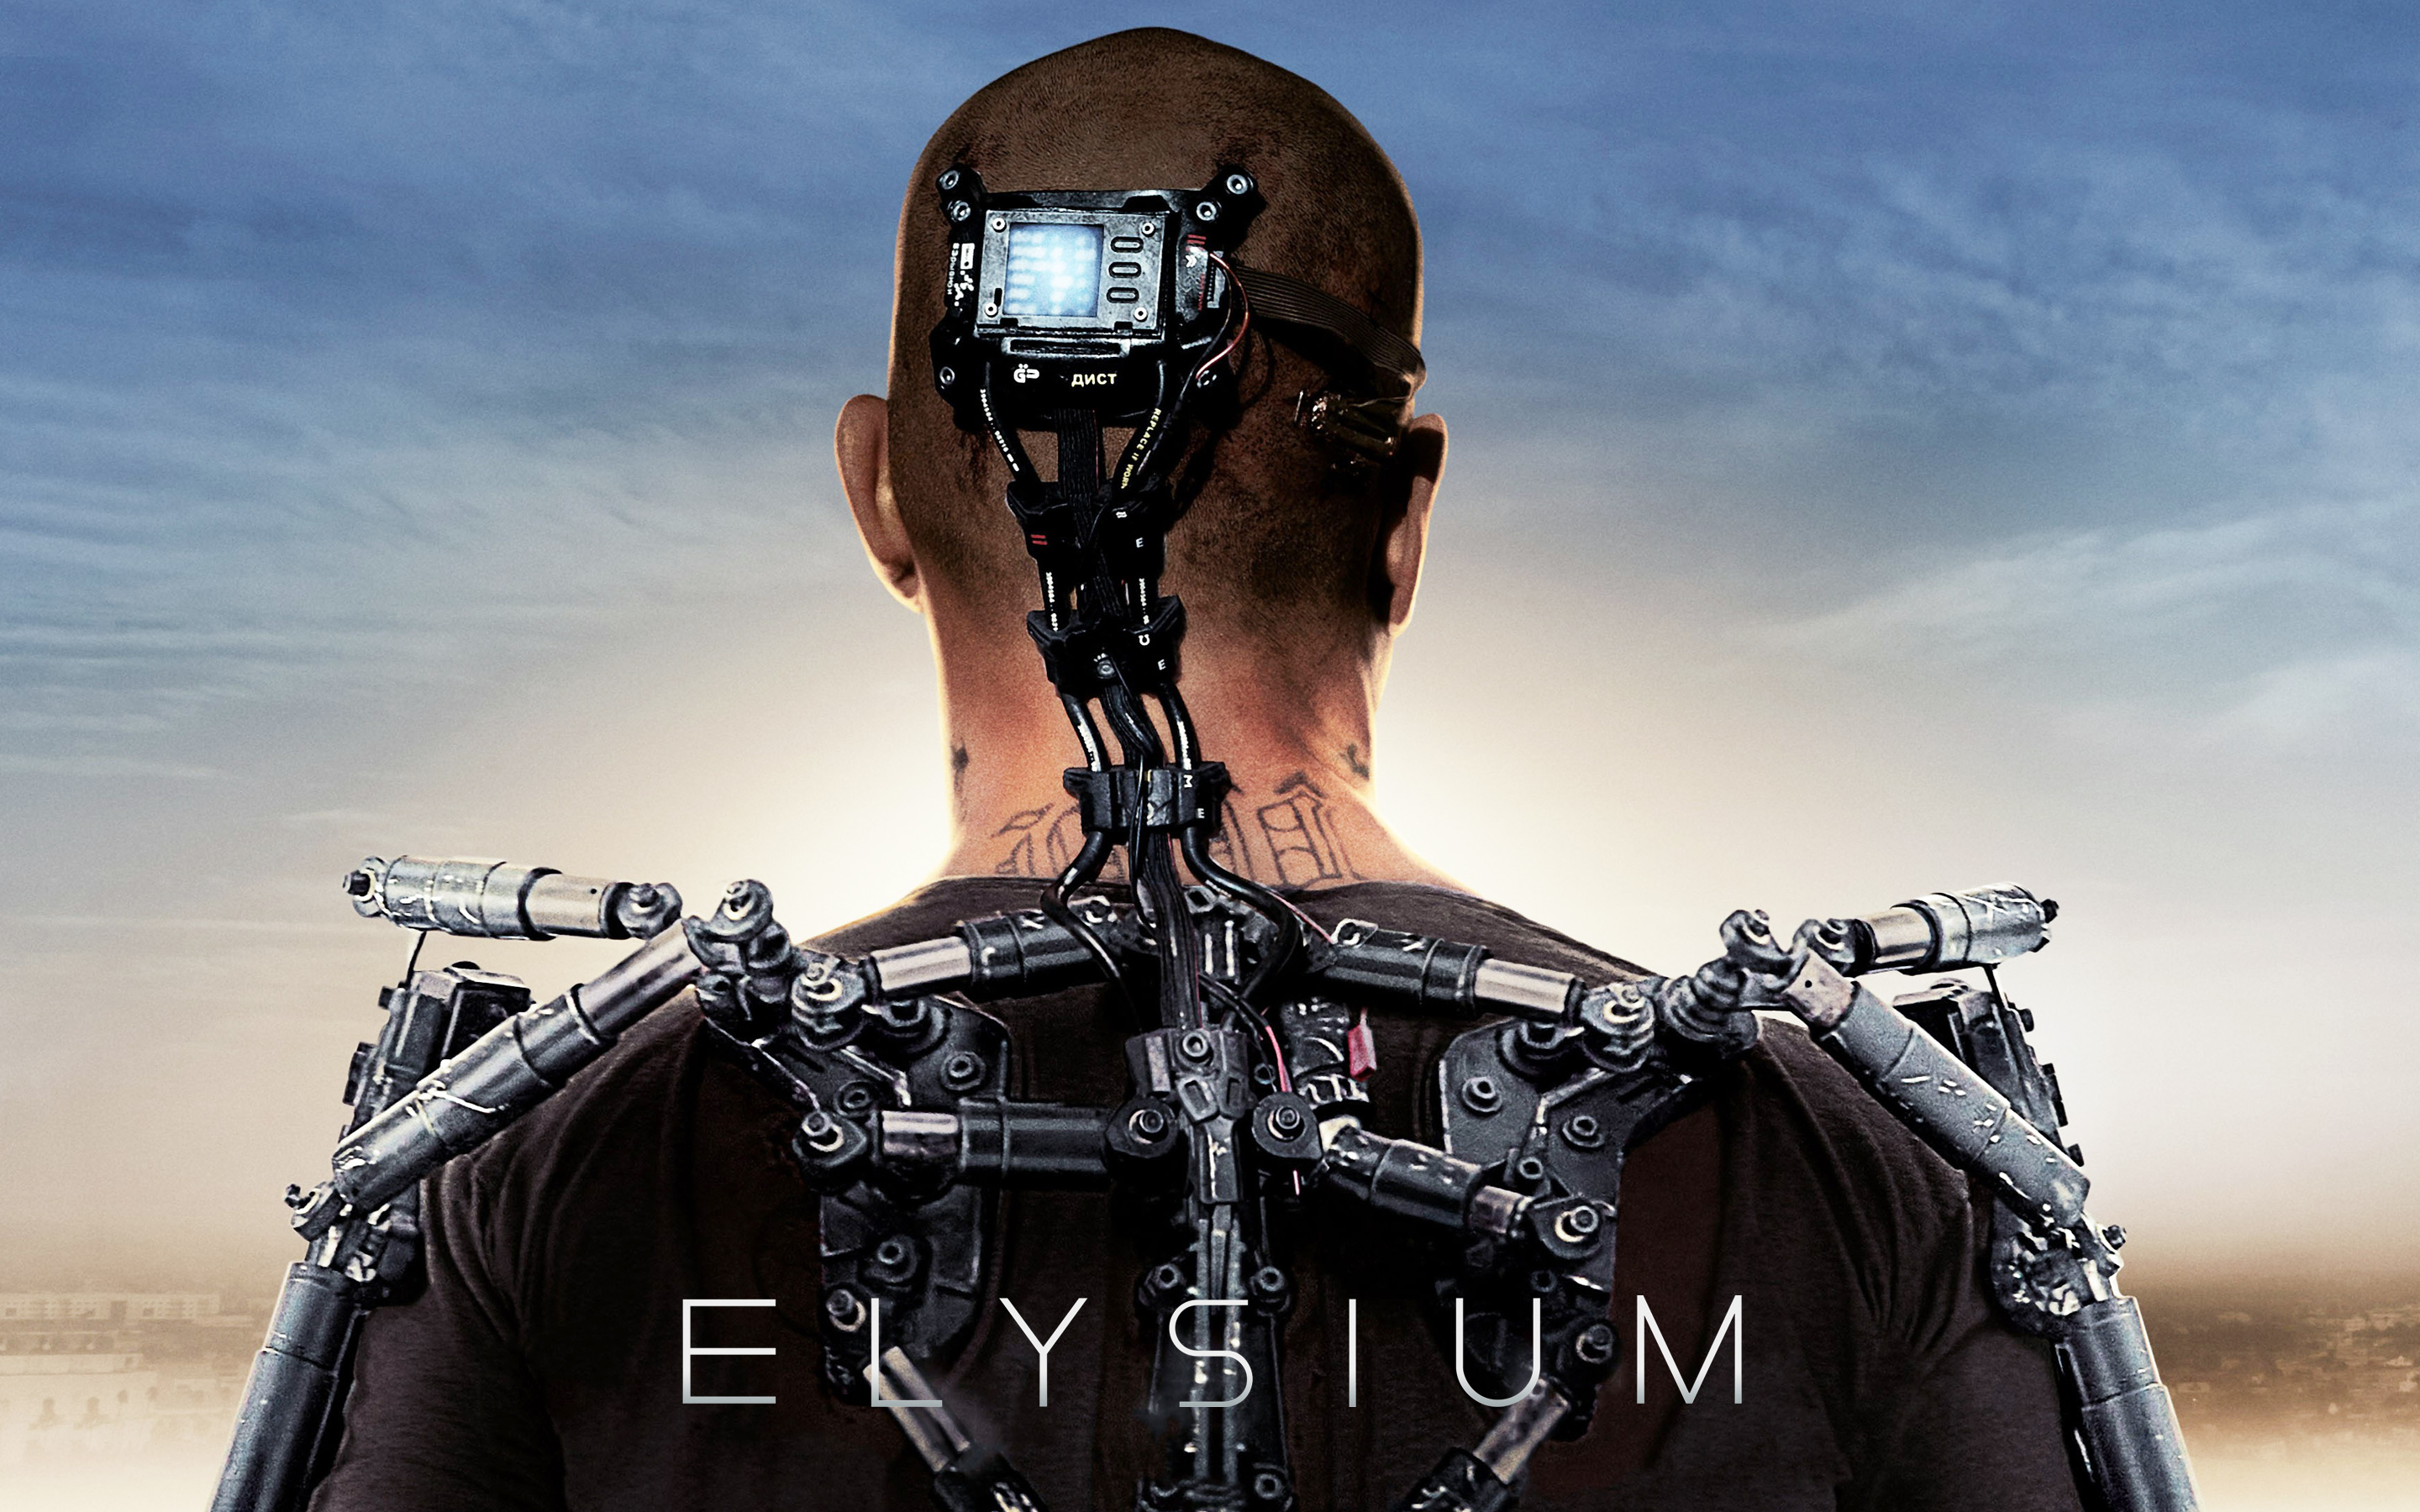 ELYSIUM: A successful High Tech Action Flick with Half-Explored Ideas Left beneath the Rubble